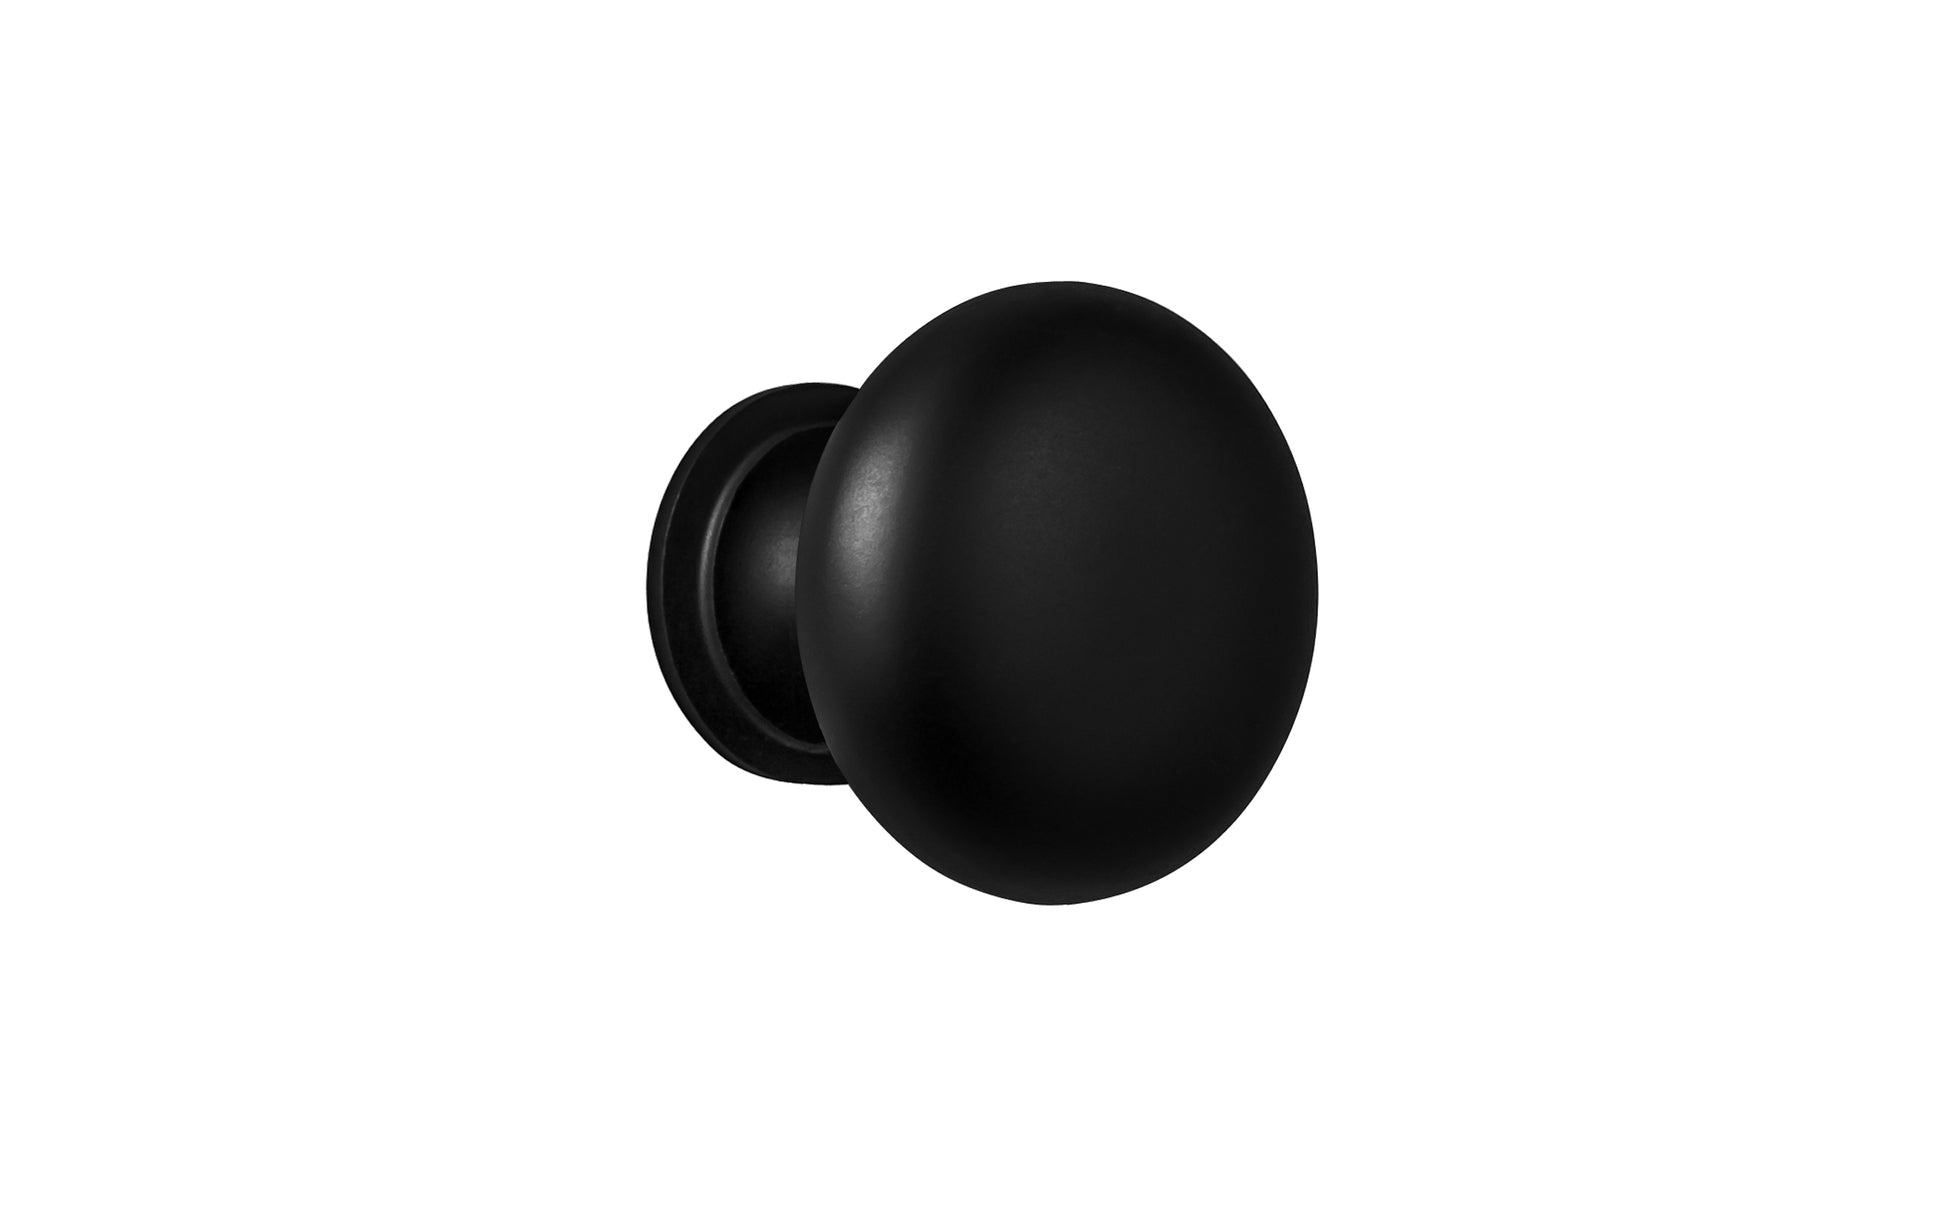 Vintage-style Hardware · Traditional & Classic Brass Knob with a Satin Black Finish. 1" diameter size knob. Made of high quality brass, this stylish round cabinet knob has a smooth look & feel on a pedestal shaped base. Works great in kitchens, bathrooms, on furniture, cabinets, drawers. Authentic reproduction hardware.